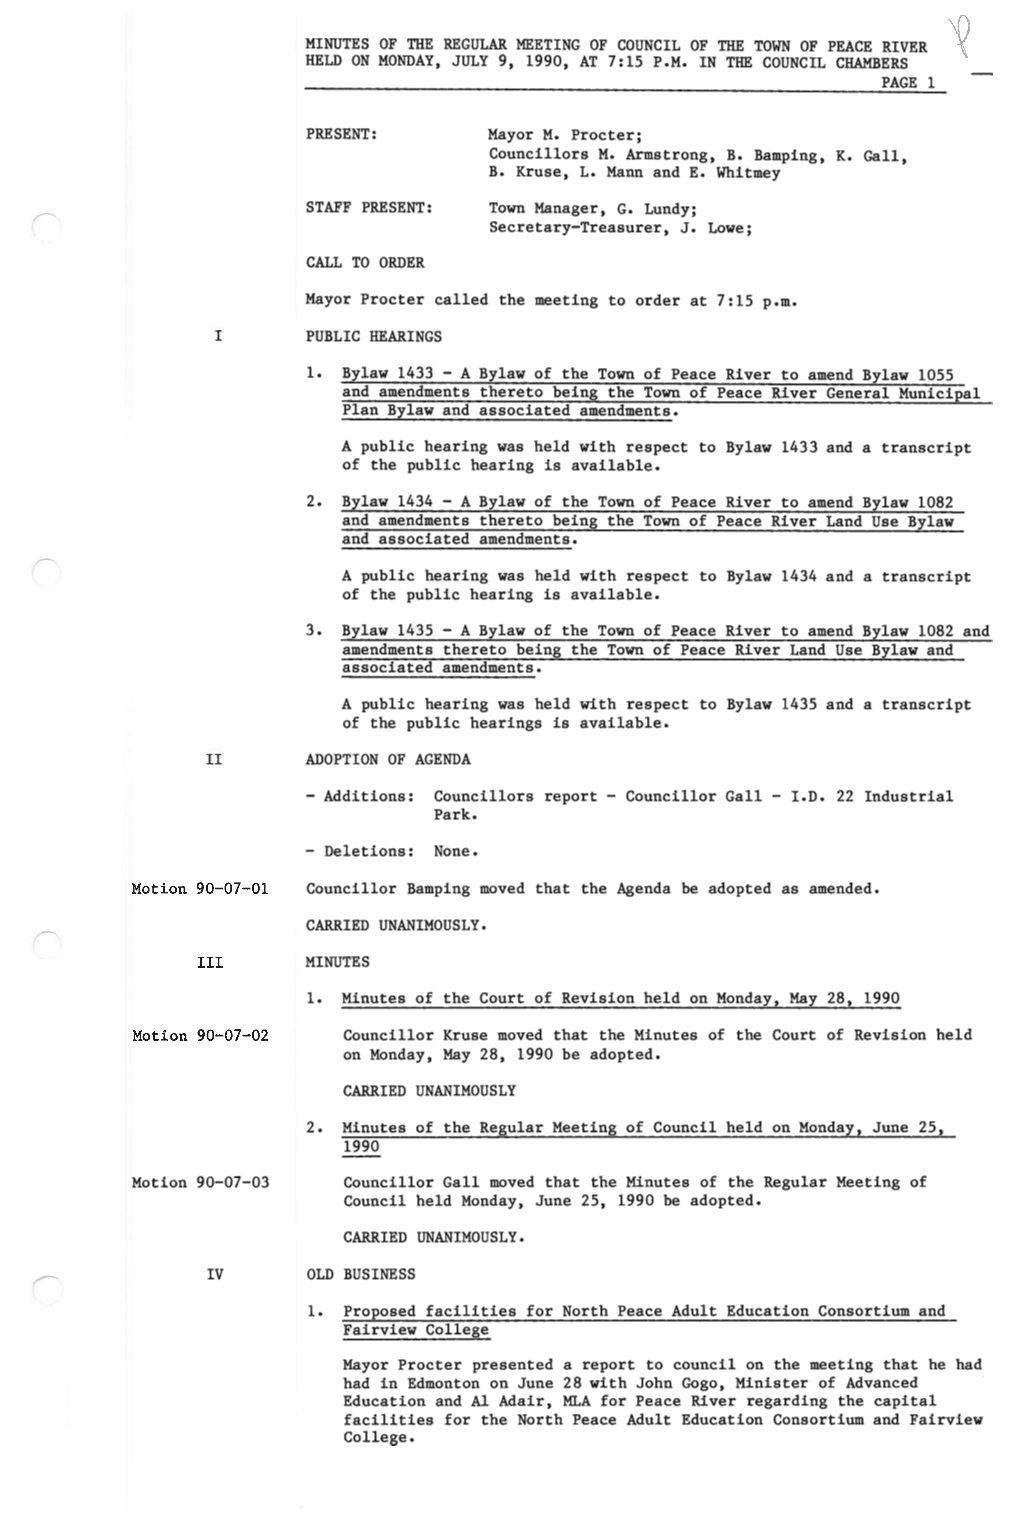 MINUTES of the REGULAR MEETING of COUNCIL of the TOWN of PEACE RIVER HELD on MONDAY, JULY 9, 1990, at 7:15 P.M